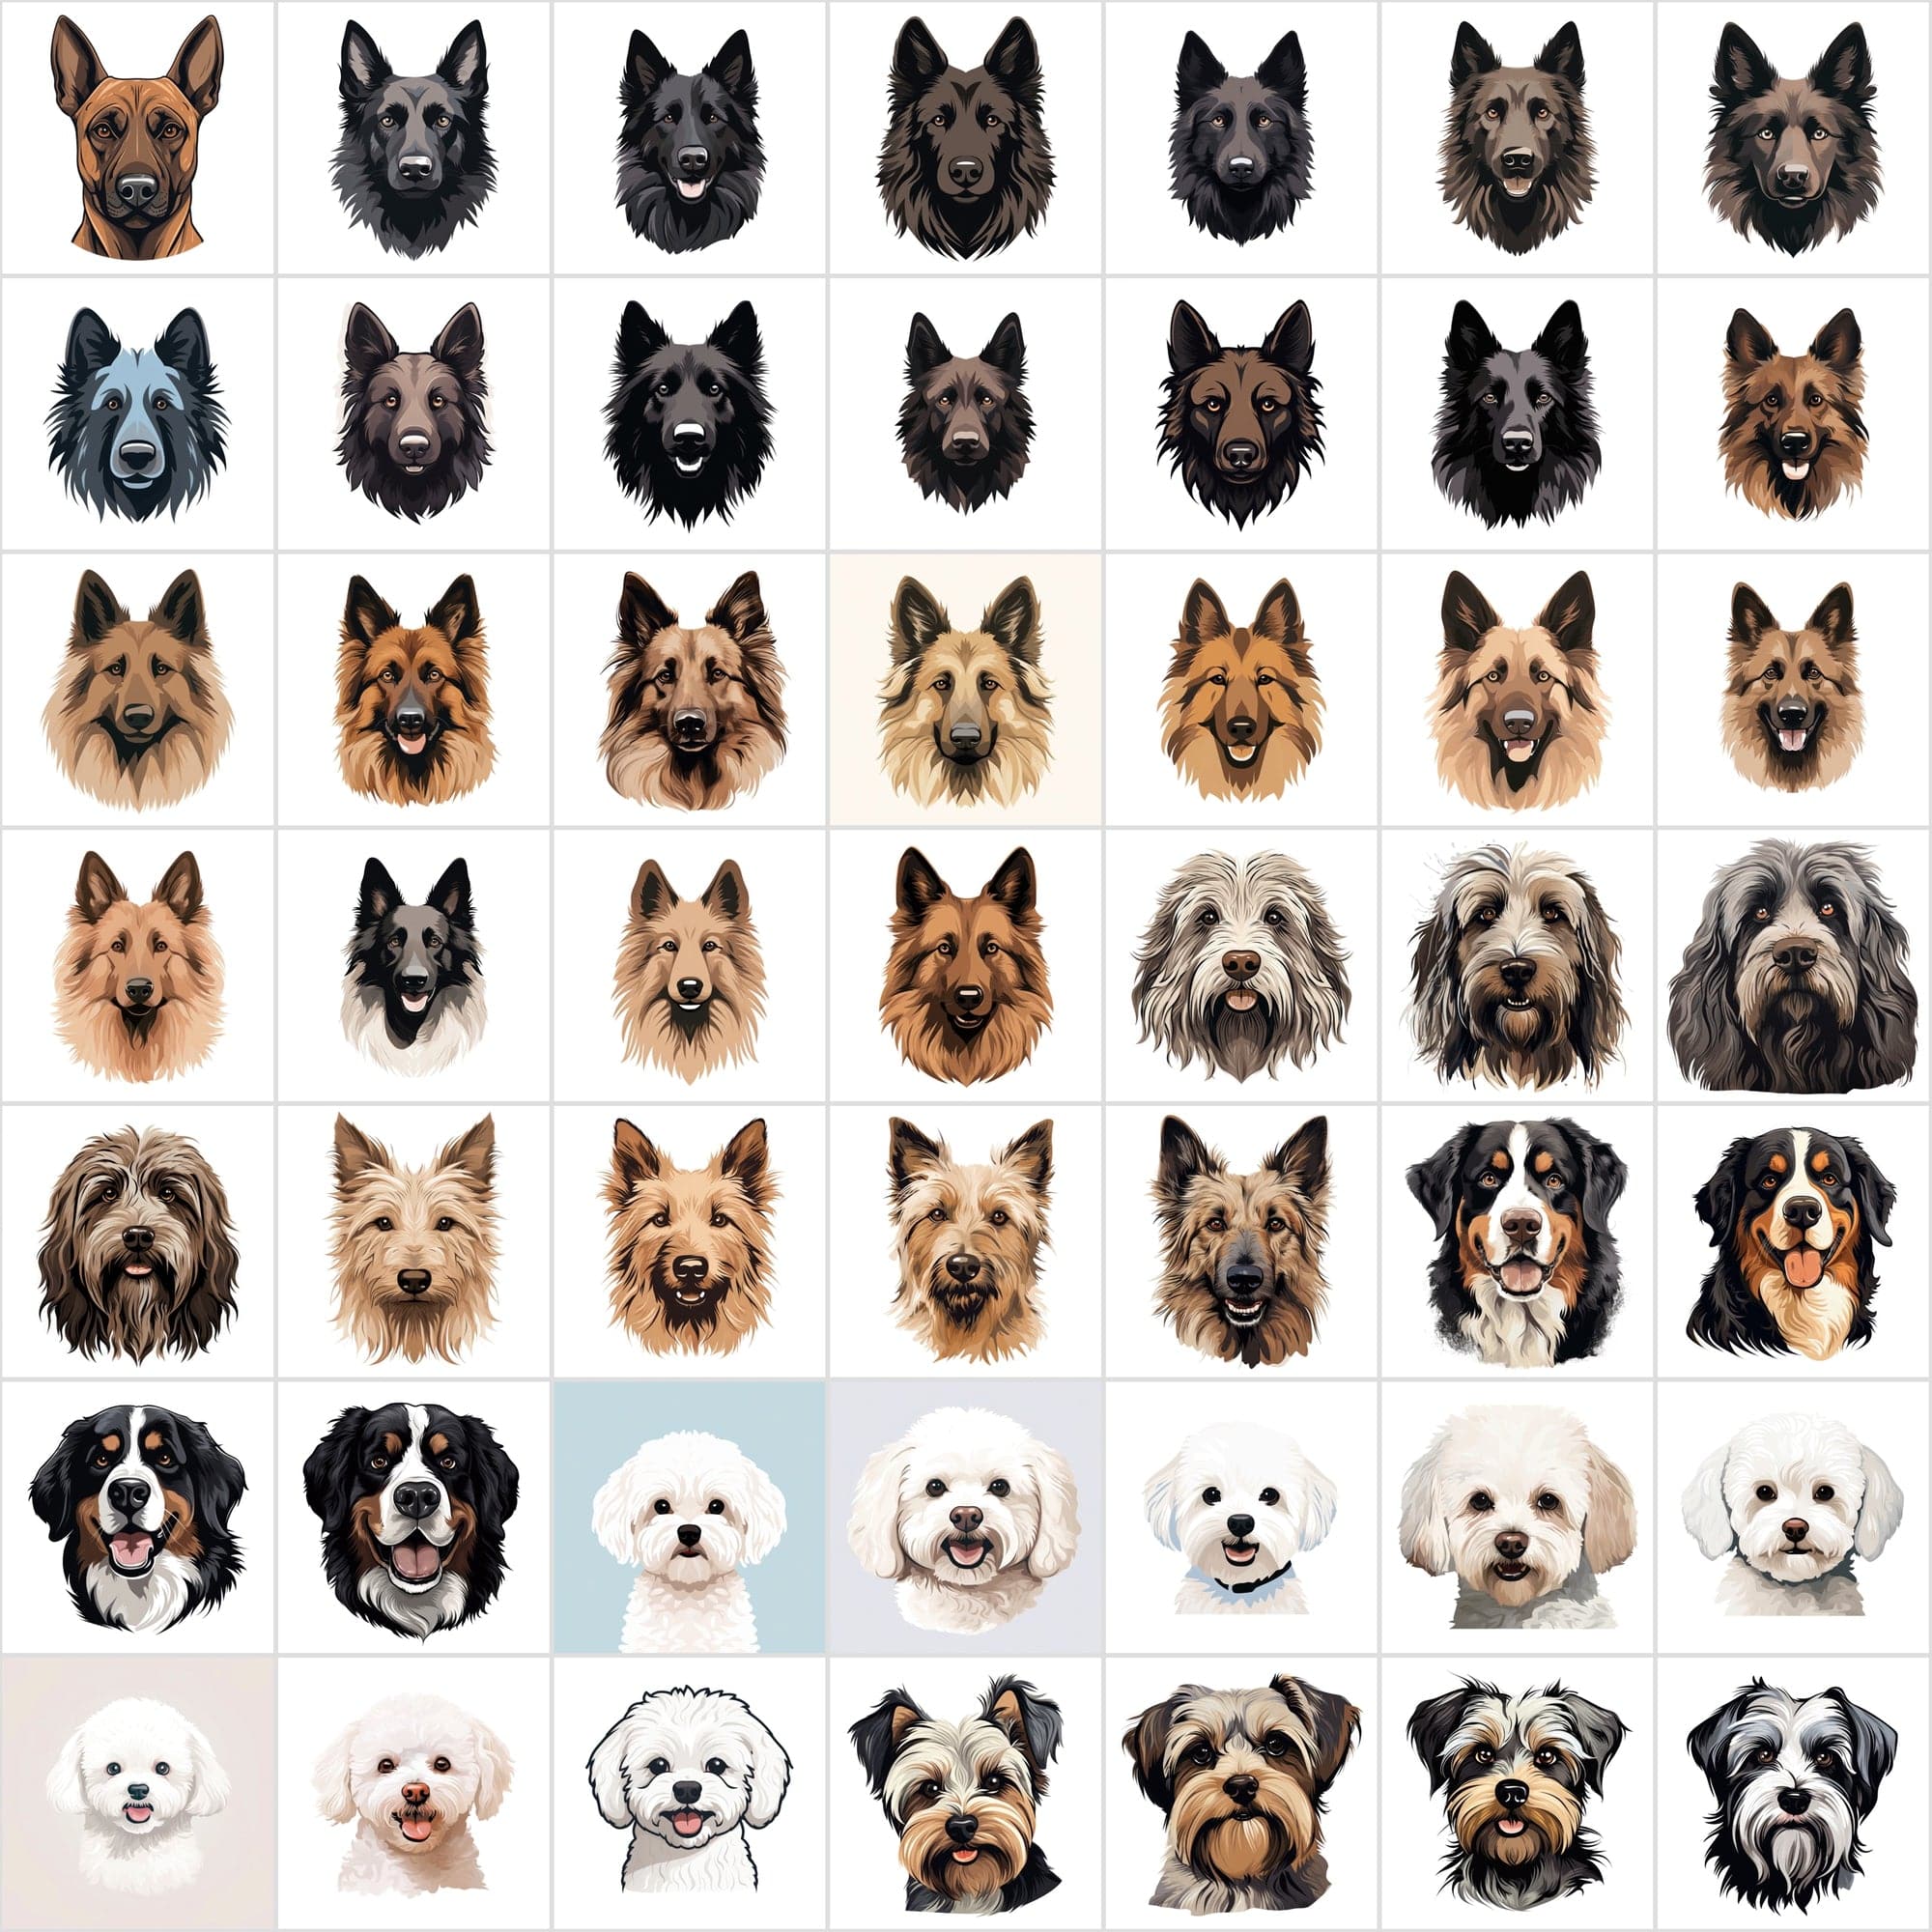 1180 Premium Dog Breed Images: High-Resolution, Transparent & White Background, Commercial License - Perfect for Designers & Pet Enthusiasts Digital Download Sumobundle